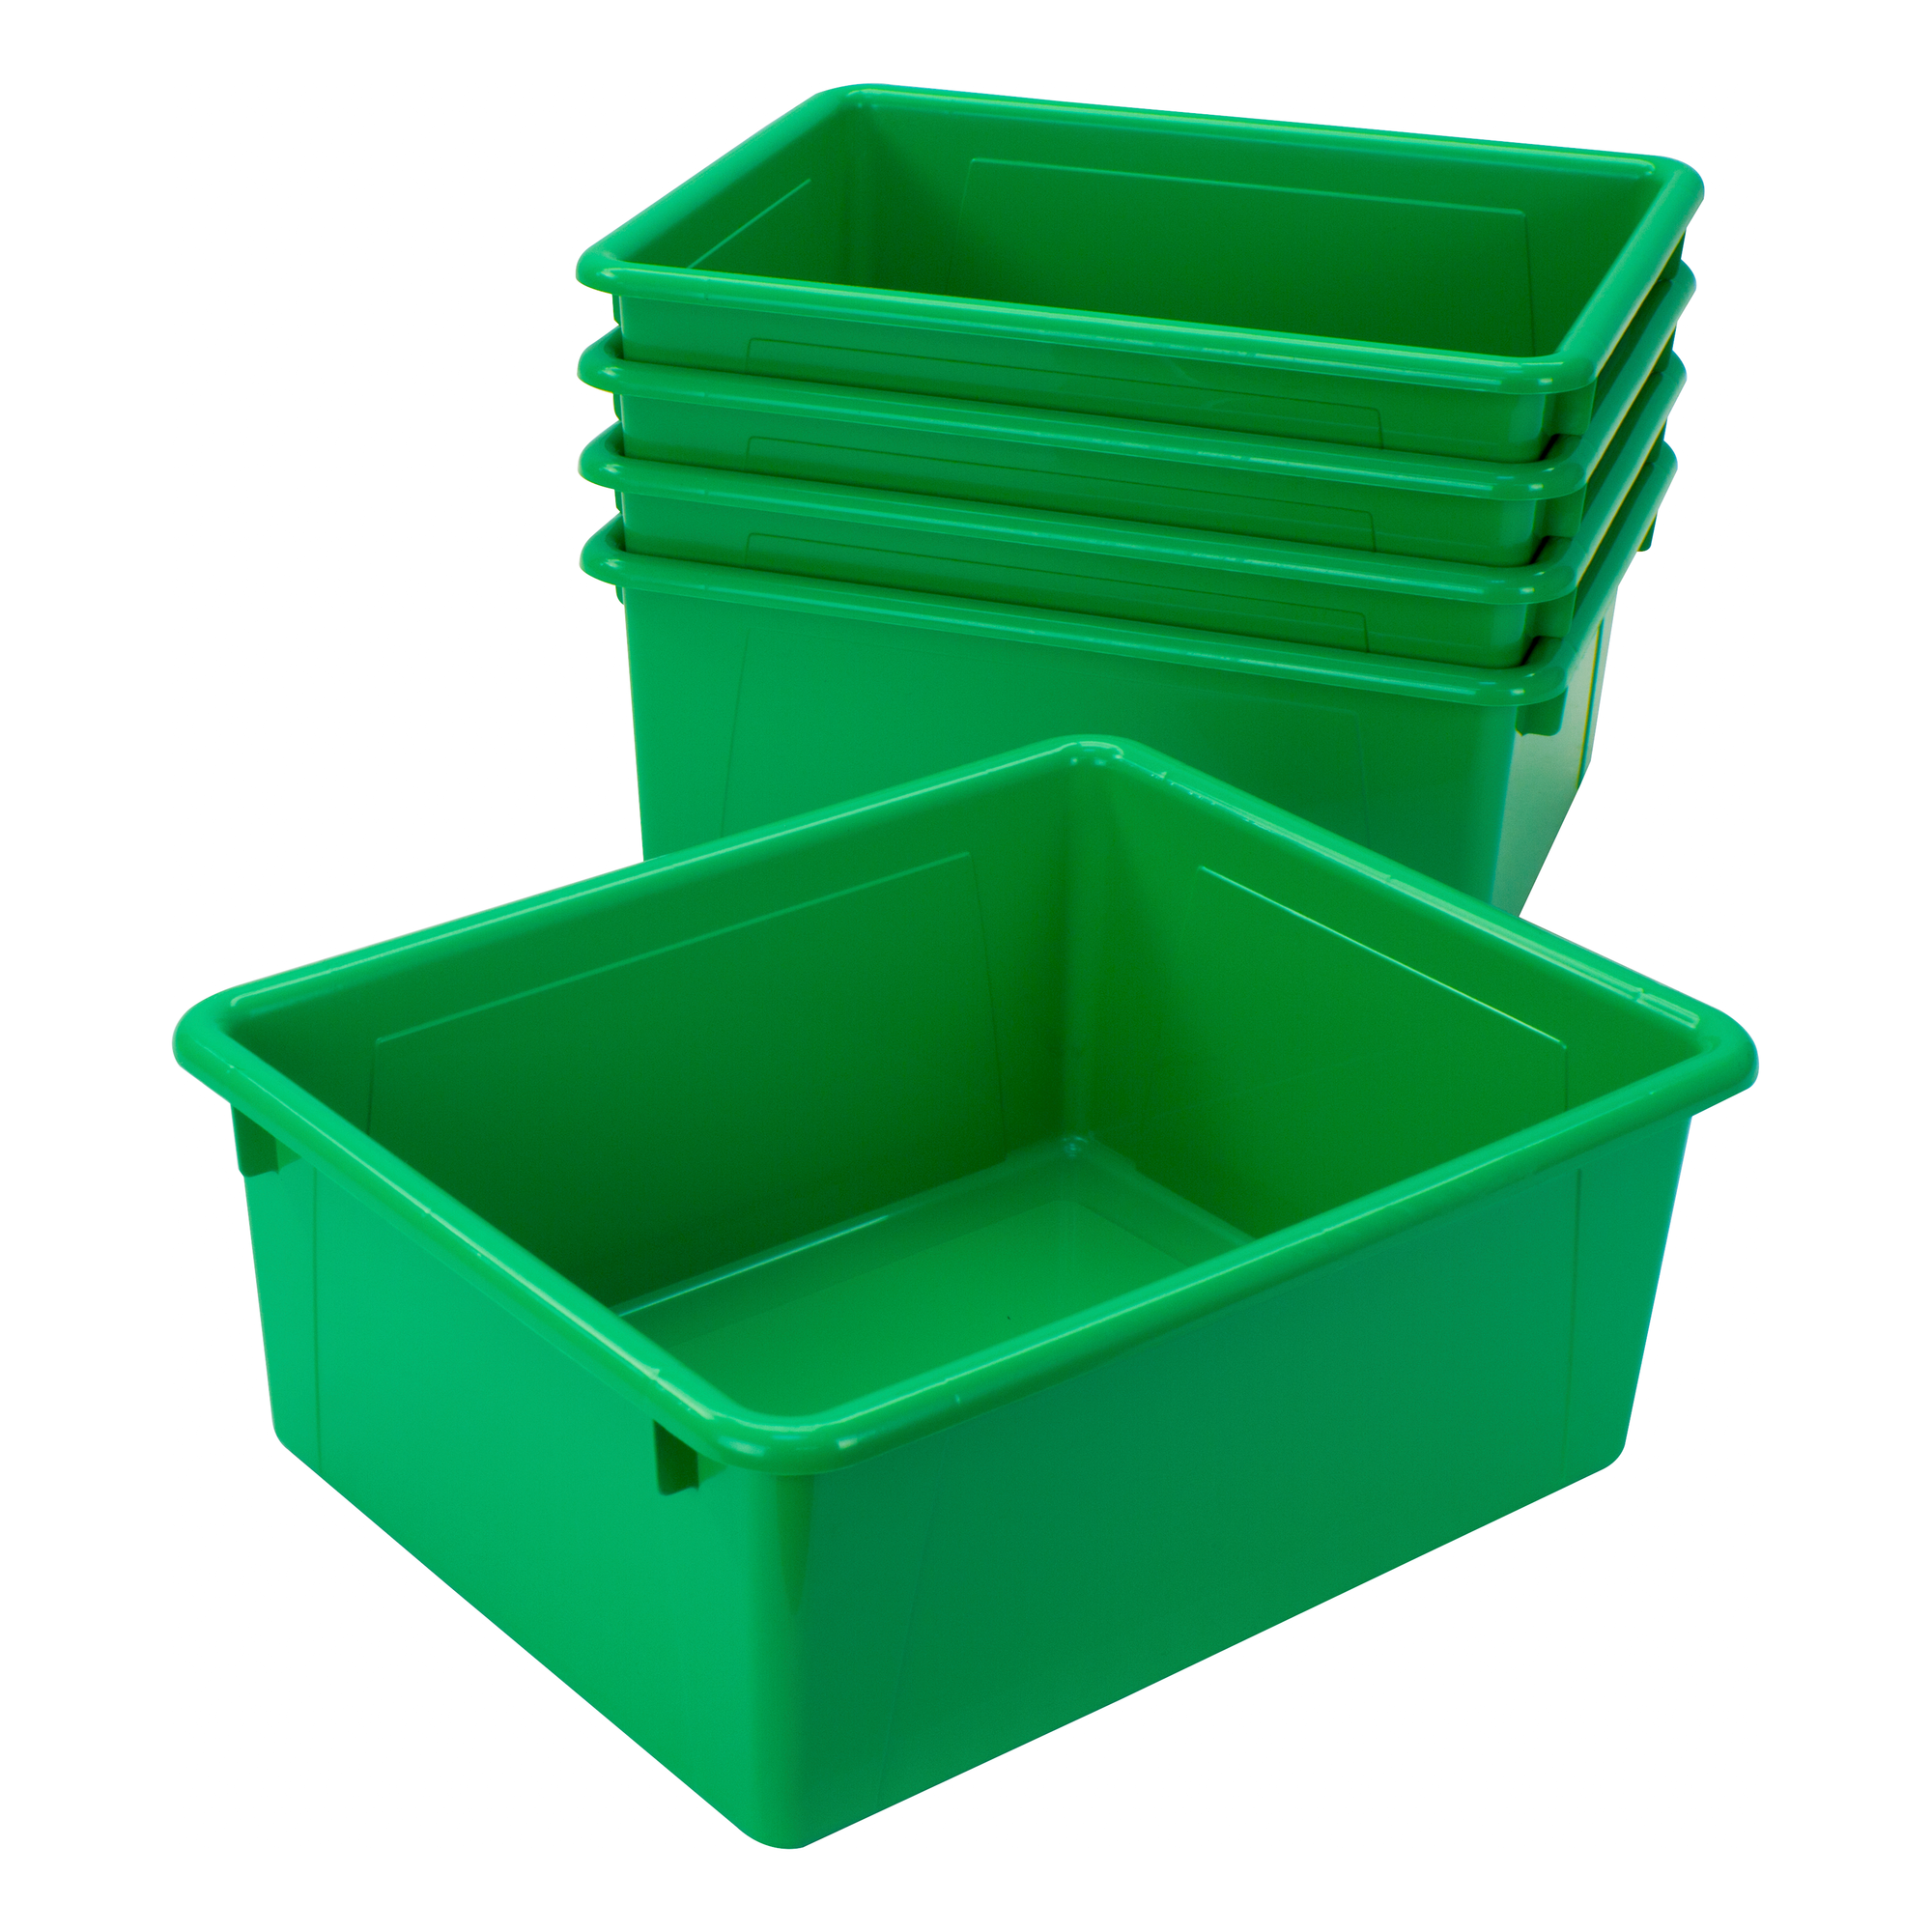 Storex Storage Tray, Letter Size, 10 x 13 x 5 Inches, Green, 5-Pack